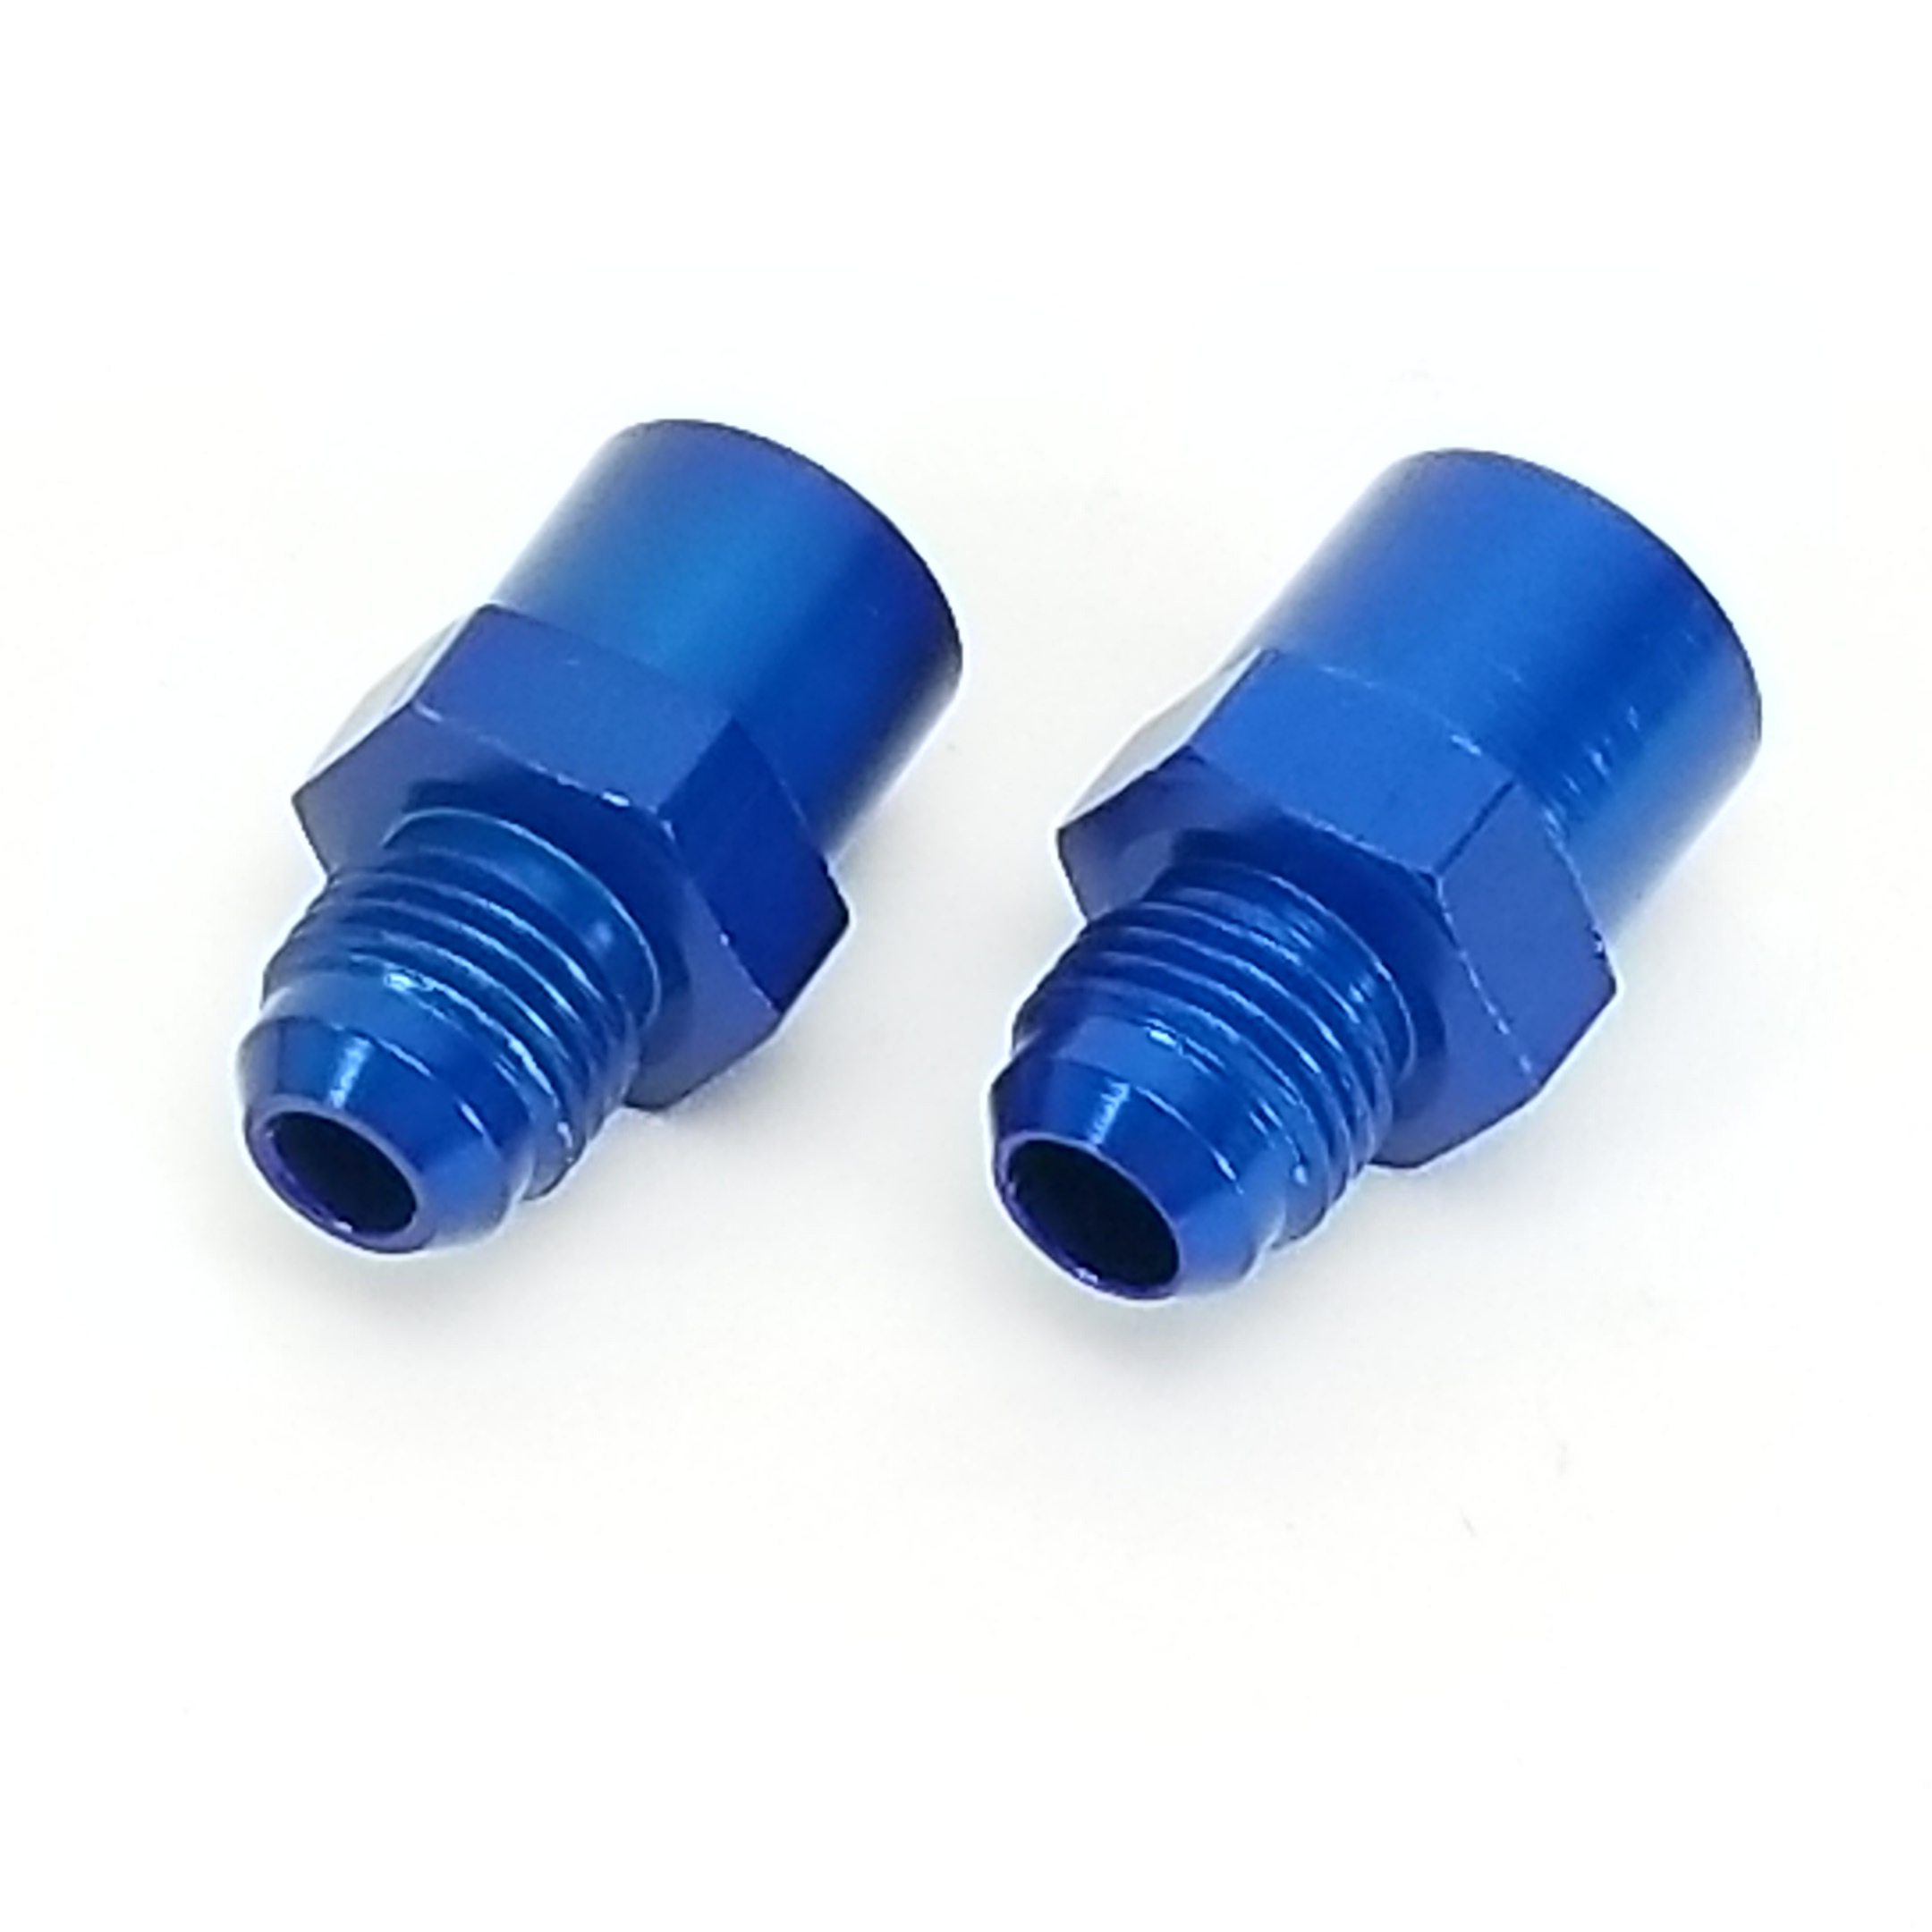 6AN to 6AN Fitting - Orb O-ring to Flare Male Coupler Adapter